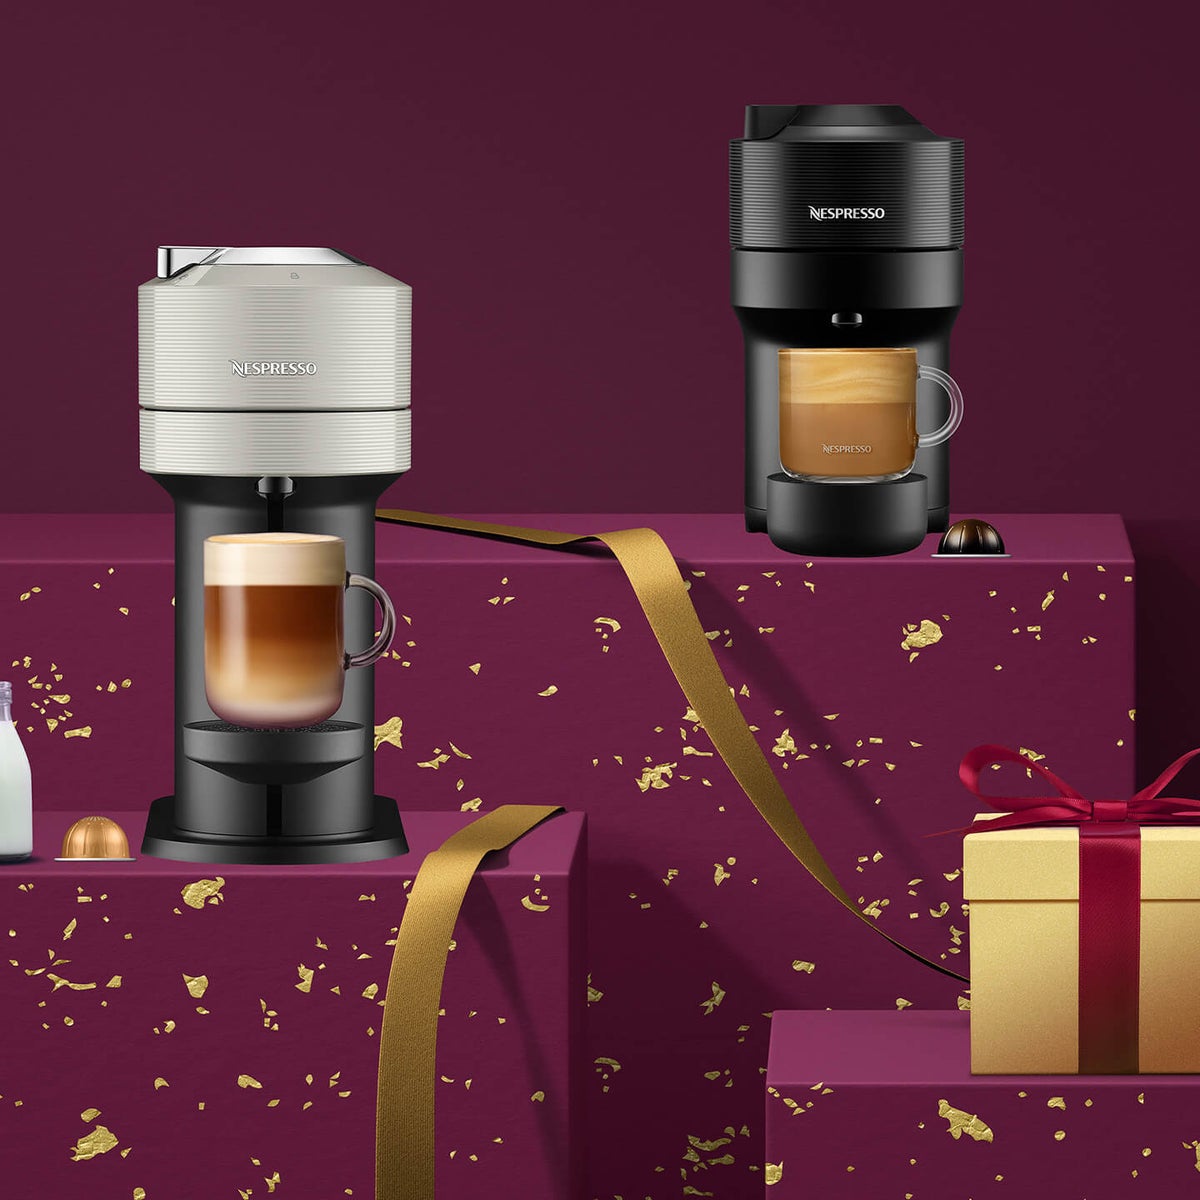 Receive a free gift set and £150 off coffee with your first